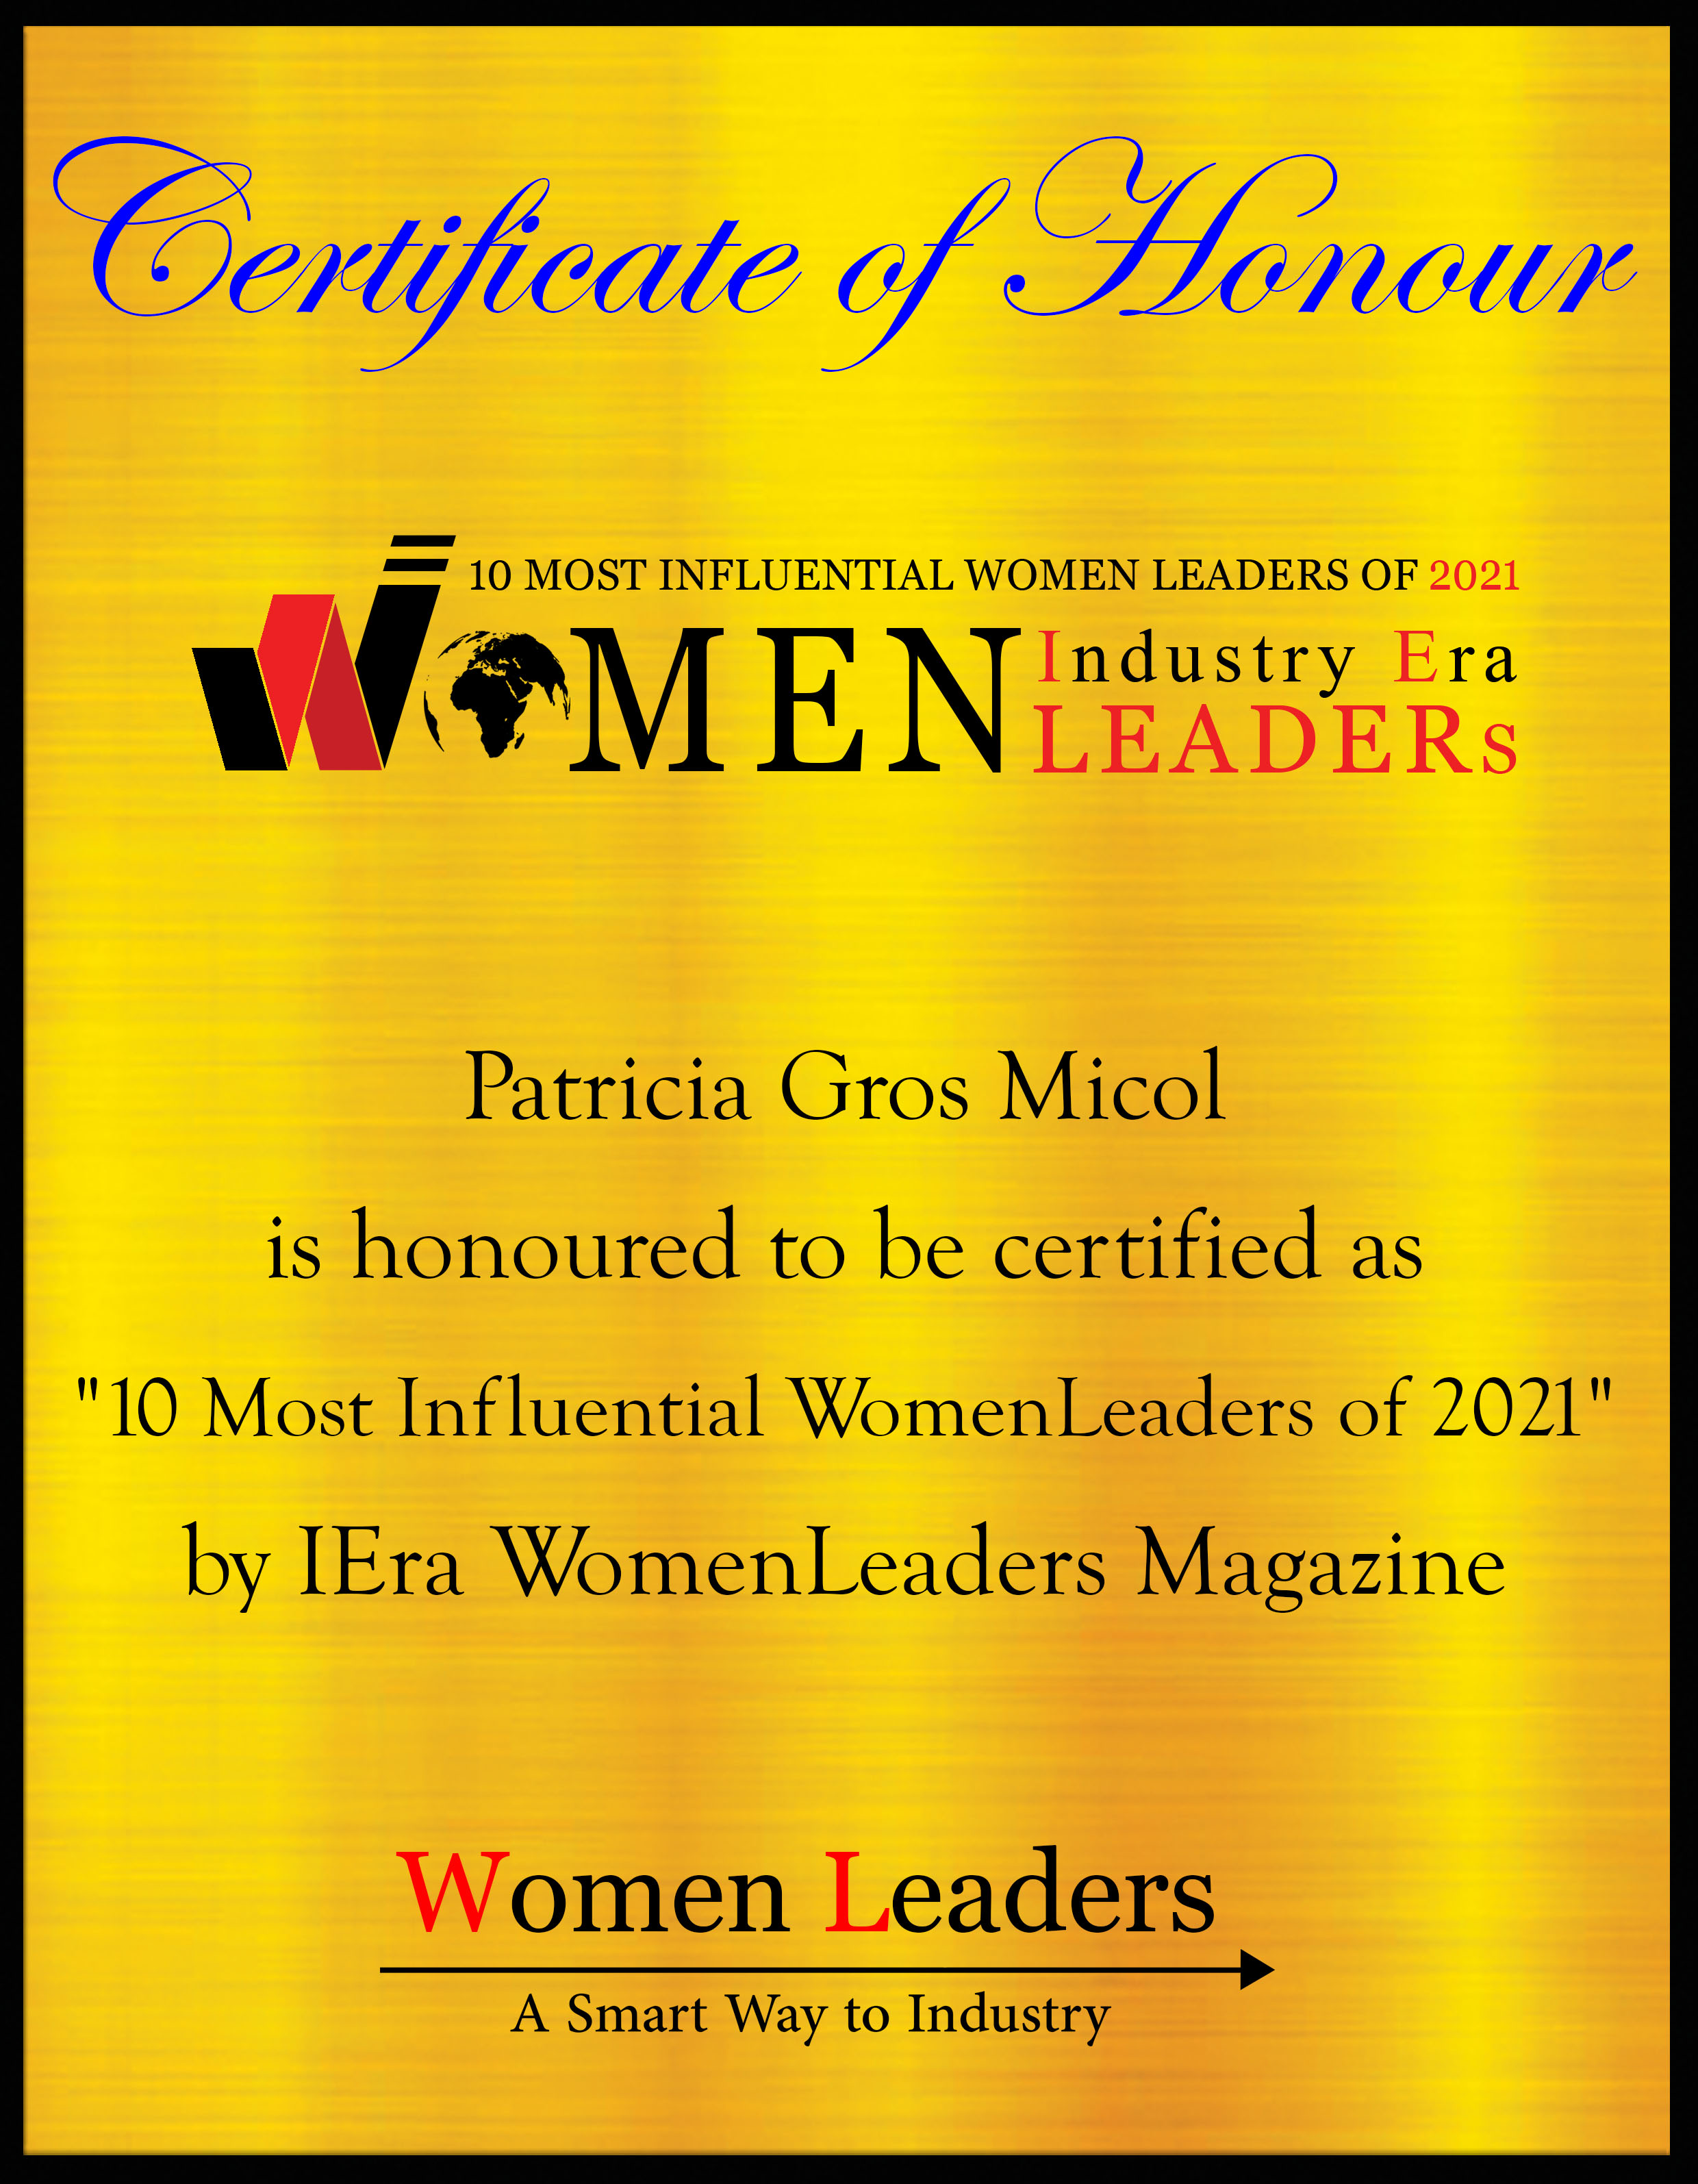 Patricia Gros Micol, Founder and CEO of HANDISHARE, Most Influential WomenLeaders of 2021